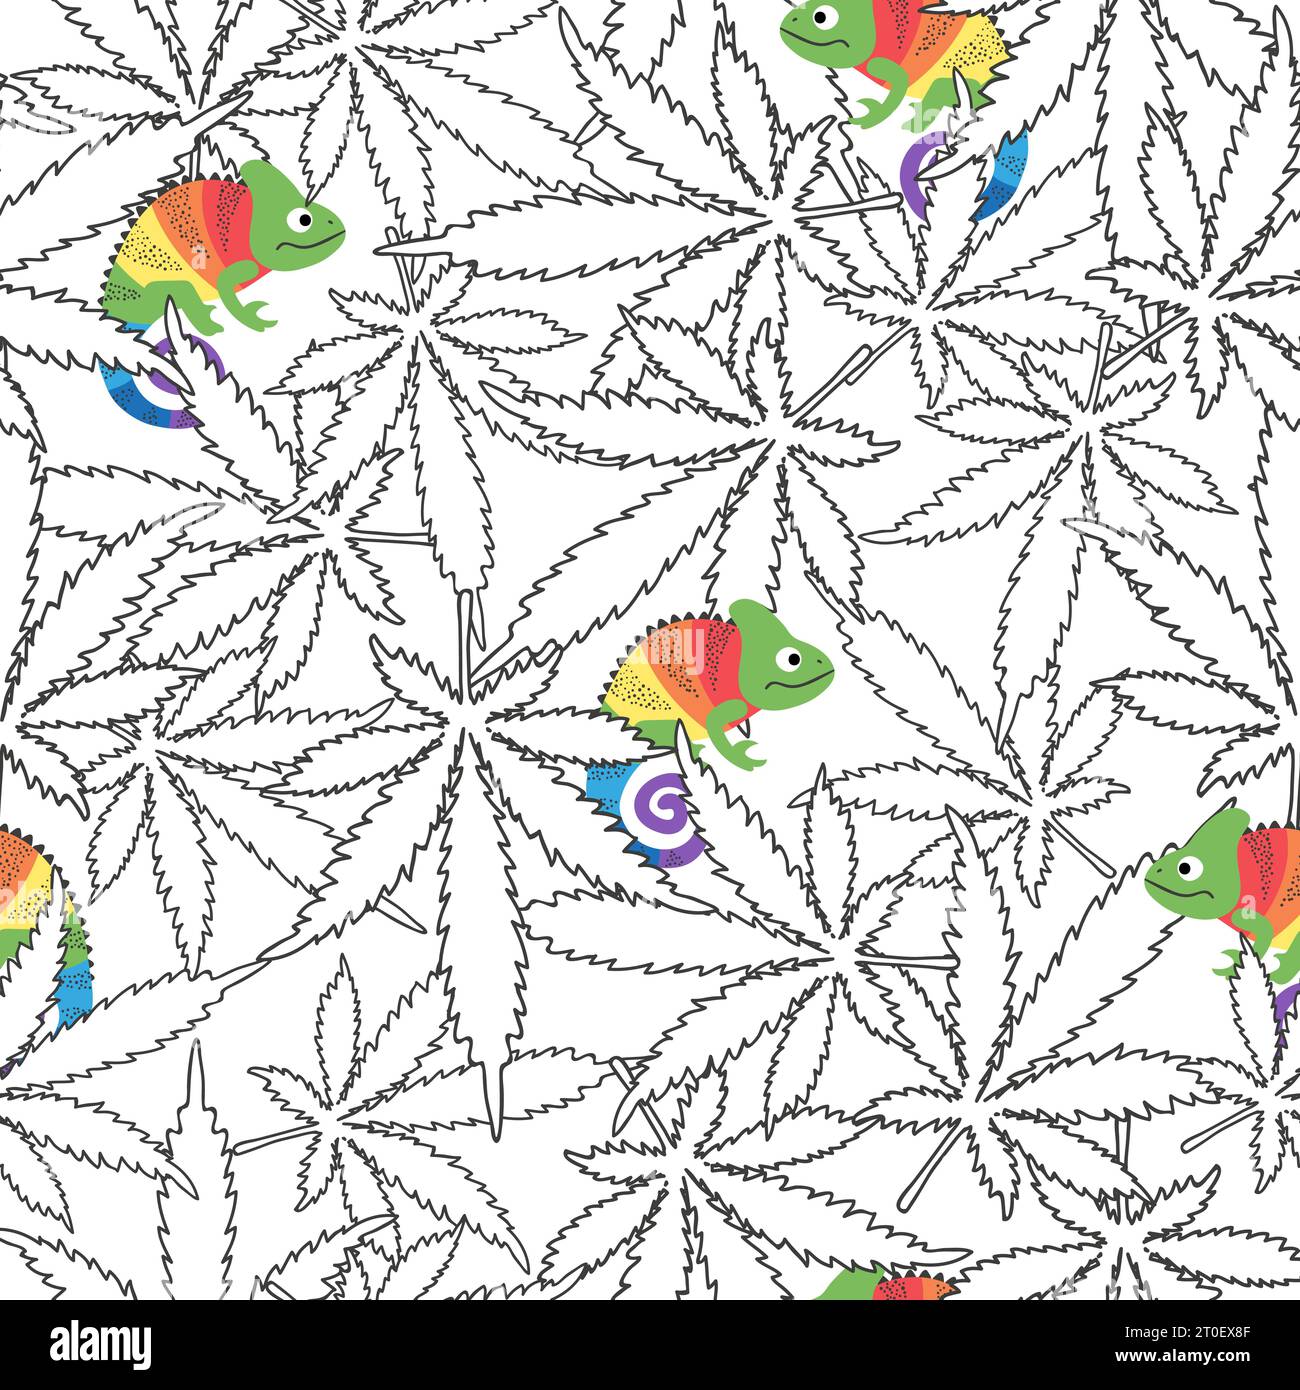 Seamless pattern with cute colorful chameleons and cannabis leaves. Stock Vector